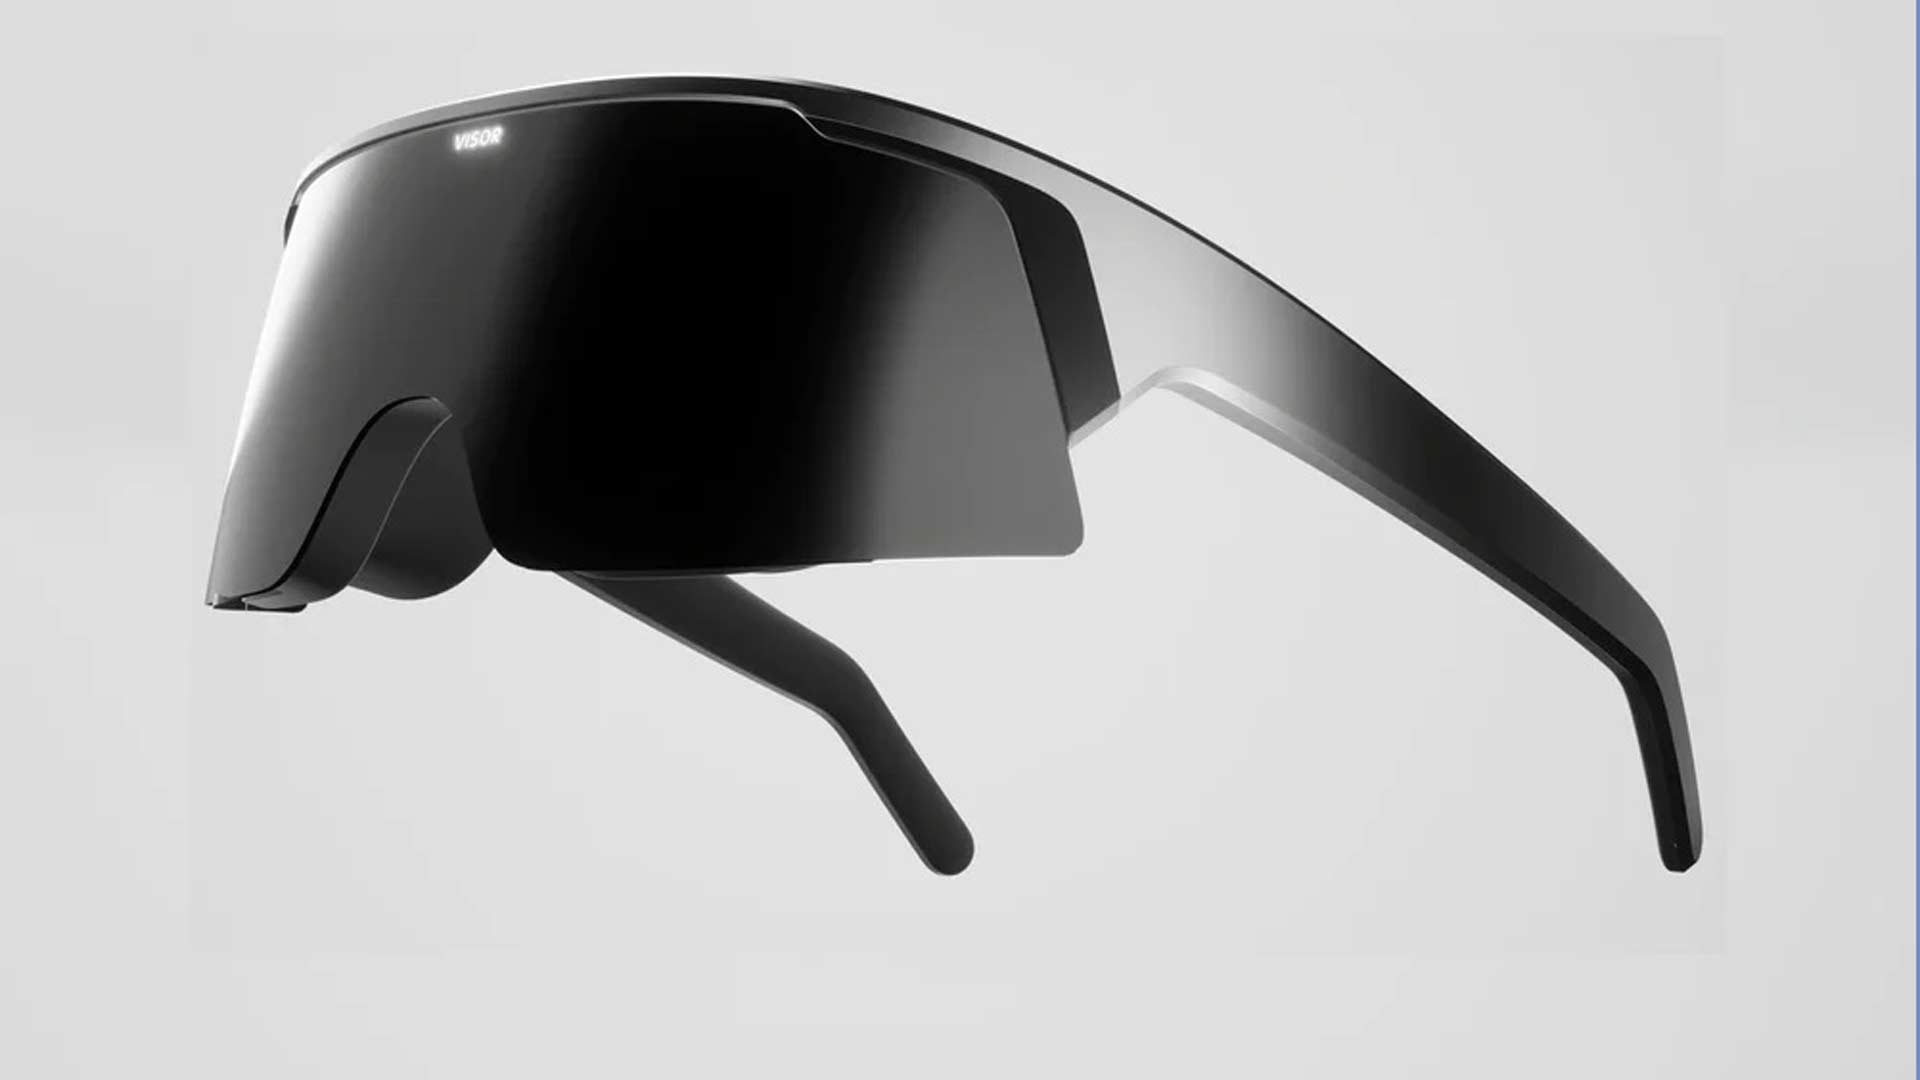 Immersed Visor VR headset: prices, new models, and preorders